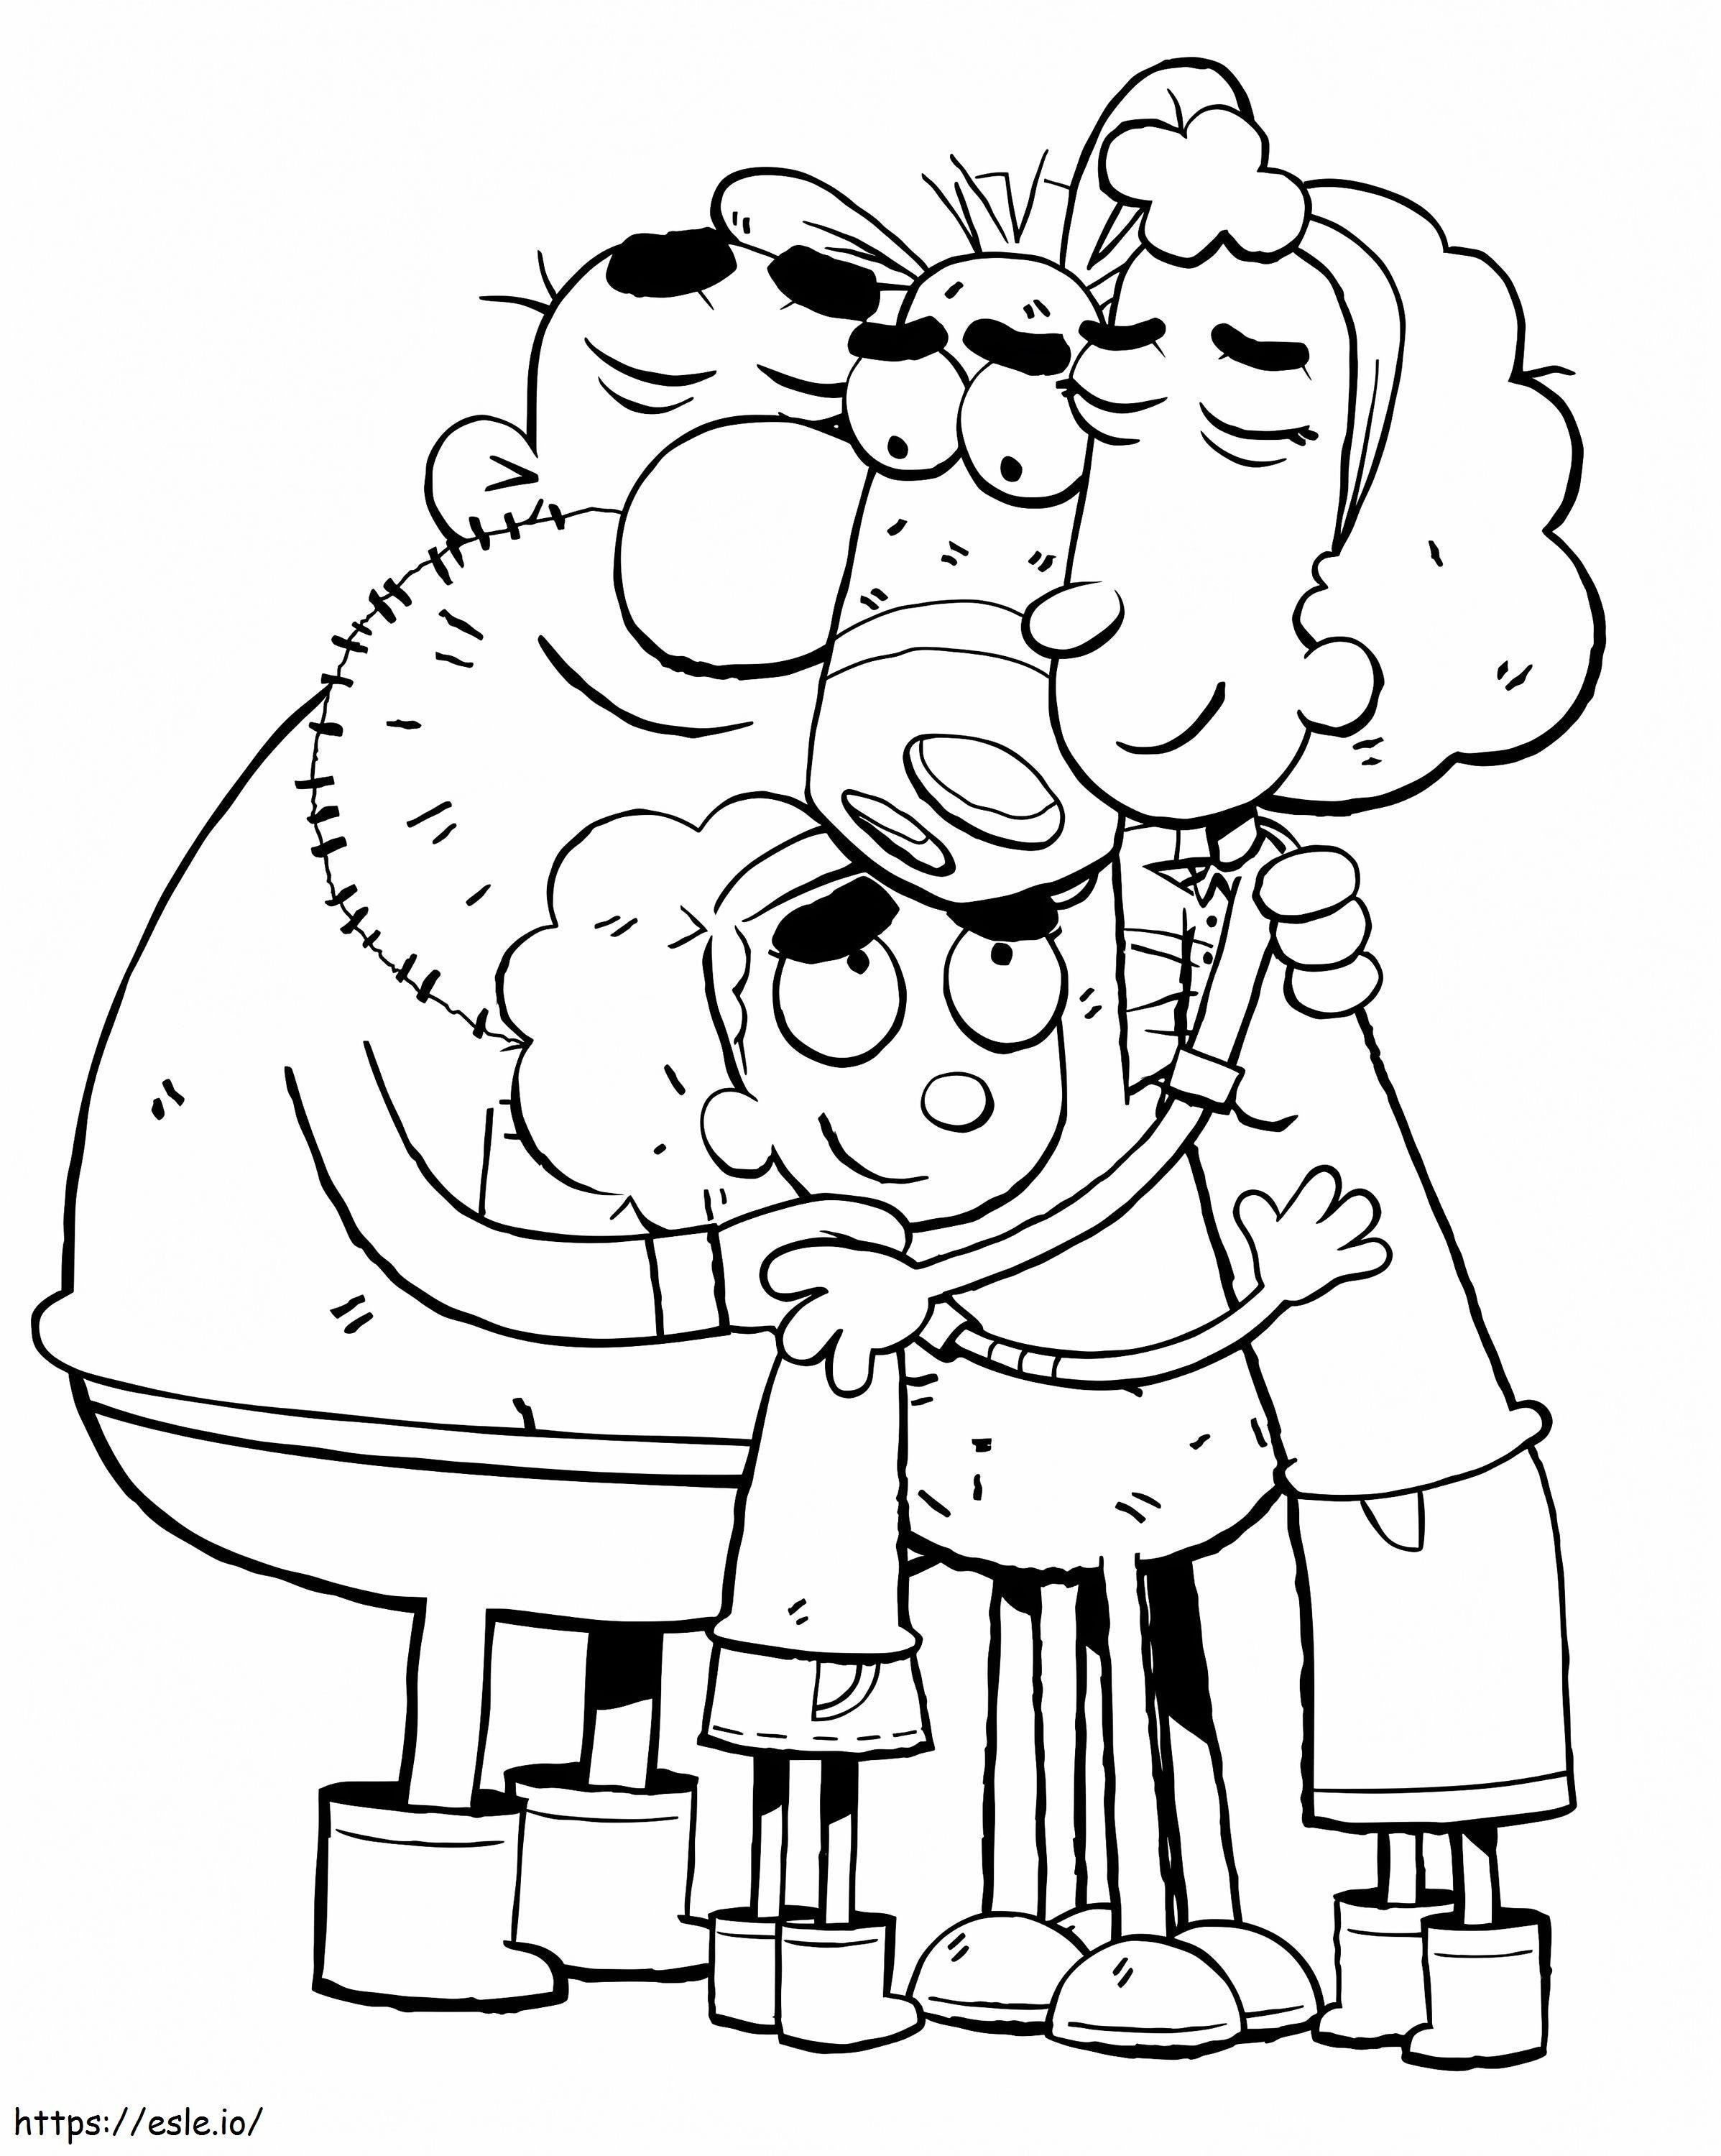 Family Bramley 1 coloring page